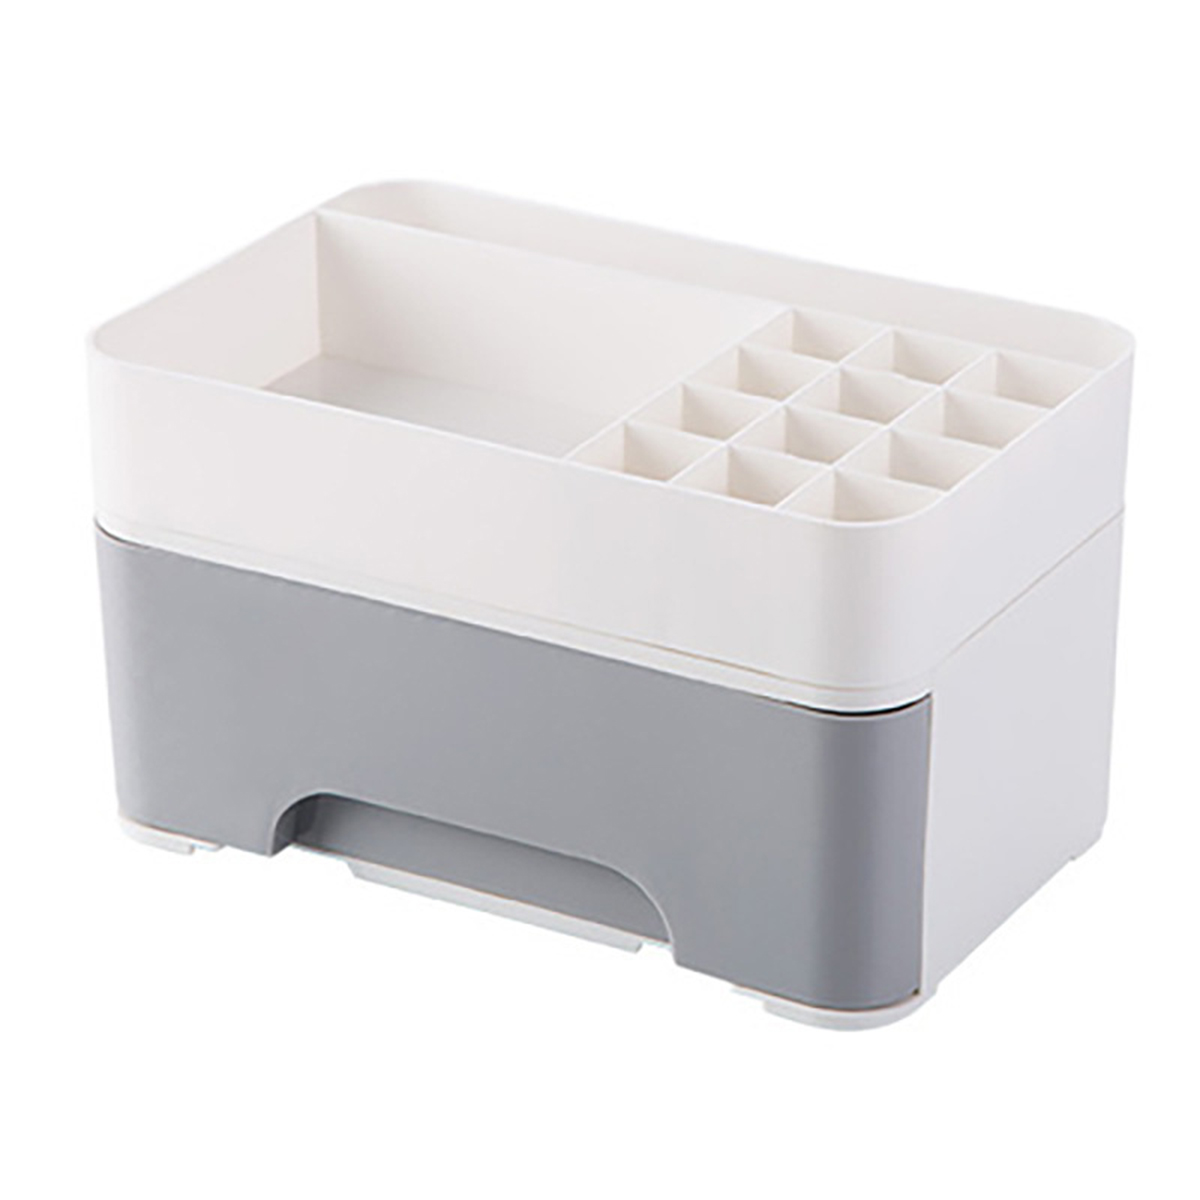 Desk-Skin-Care-Products-Storage-Box-Multi-functional-Lipstick-Cosmetic-Storage-Box-with-Drawer-Home--1763759-6